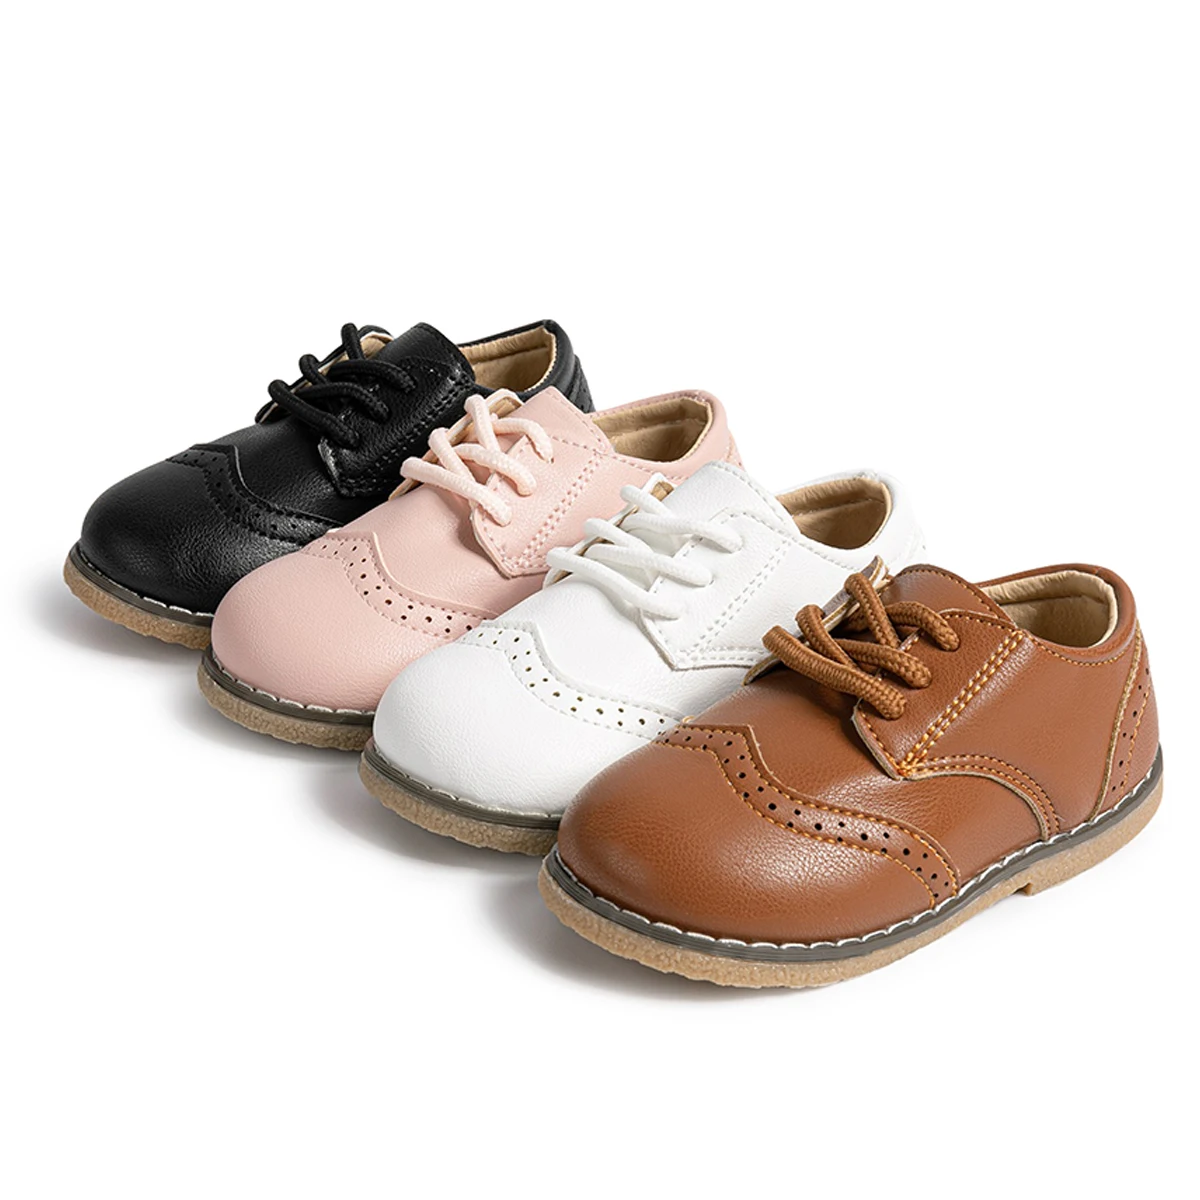 New Design Party Wedding Outdoor children Shoes Boy PU Leather Rubber Soft Sole School Kids Dress Kid Shoes